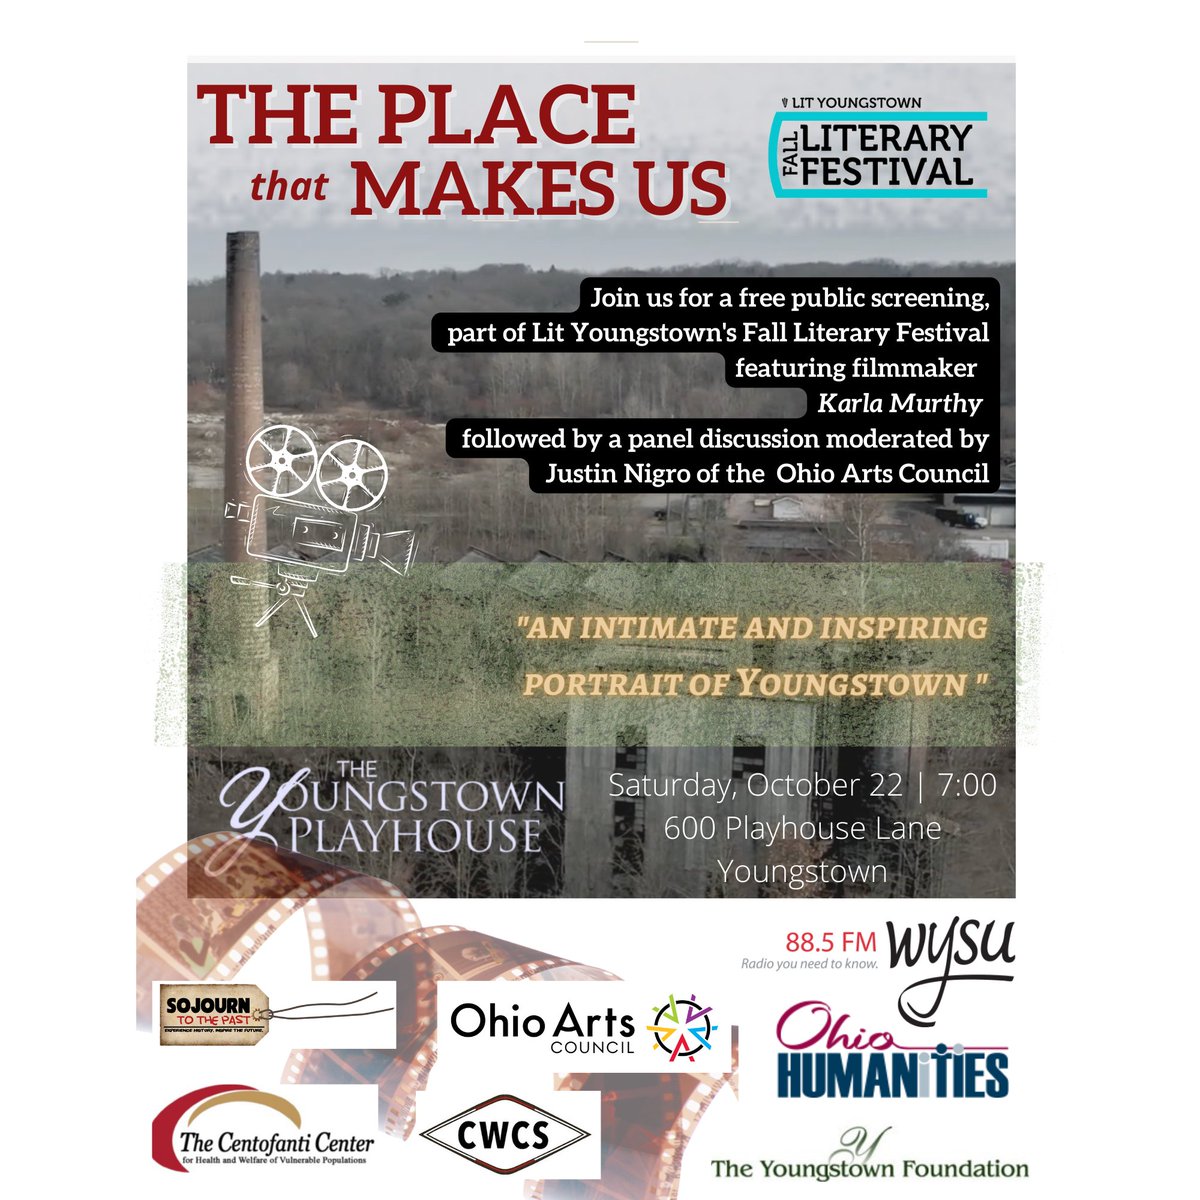 A free public screening of 'The Place That Makes Us' will be shown at @LitYoungstown 6th annual Fall Literary Festival on Saturday, October 22 at 7:00pm! The screening will take place at The Youngstown Playhouse located at 600 Playhouse Lane. bit.ly/3RsTmjv